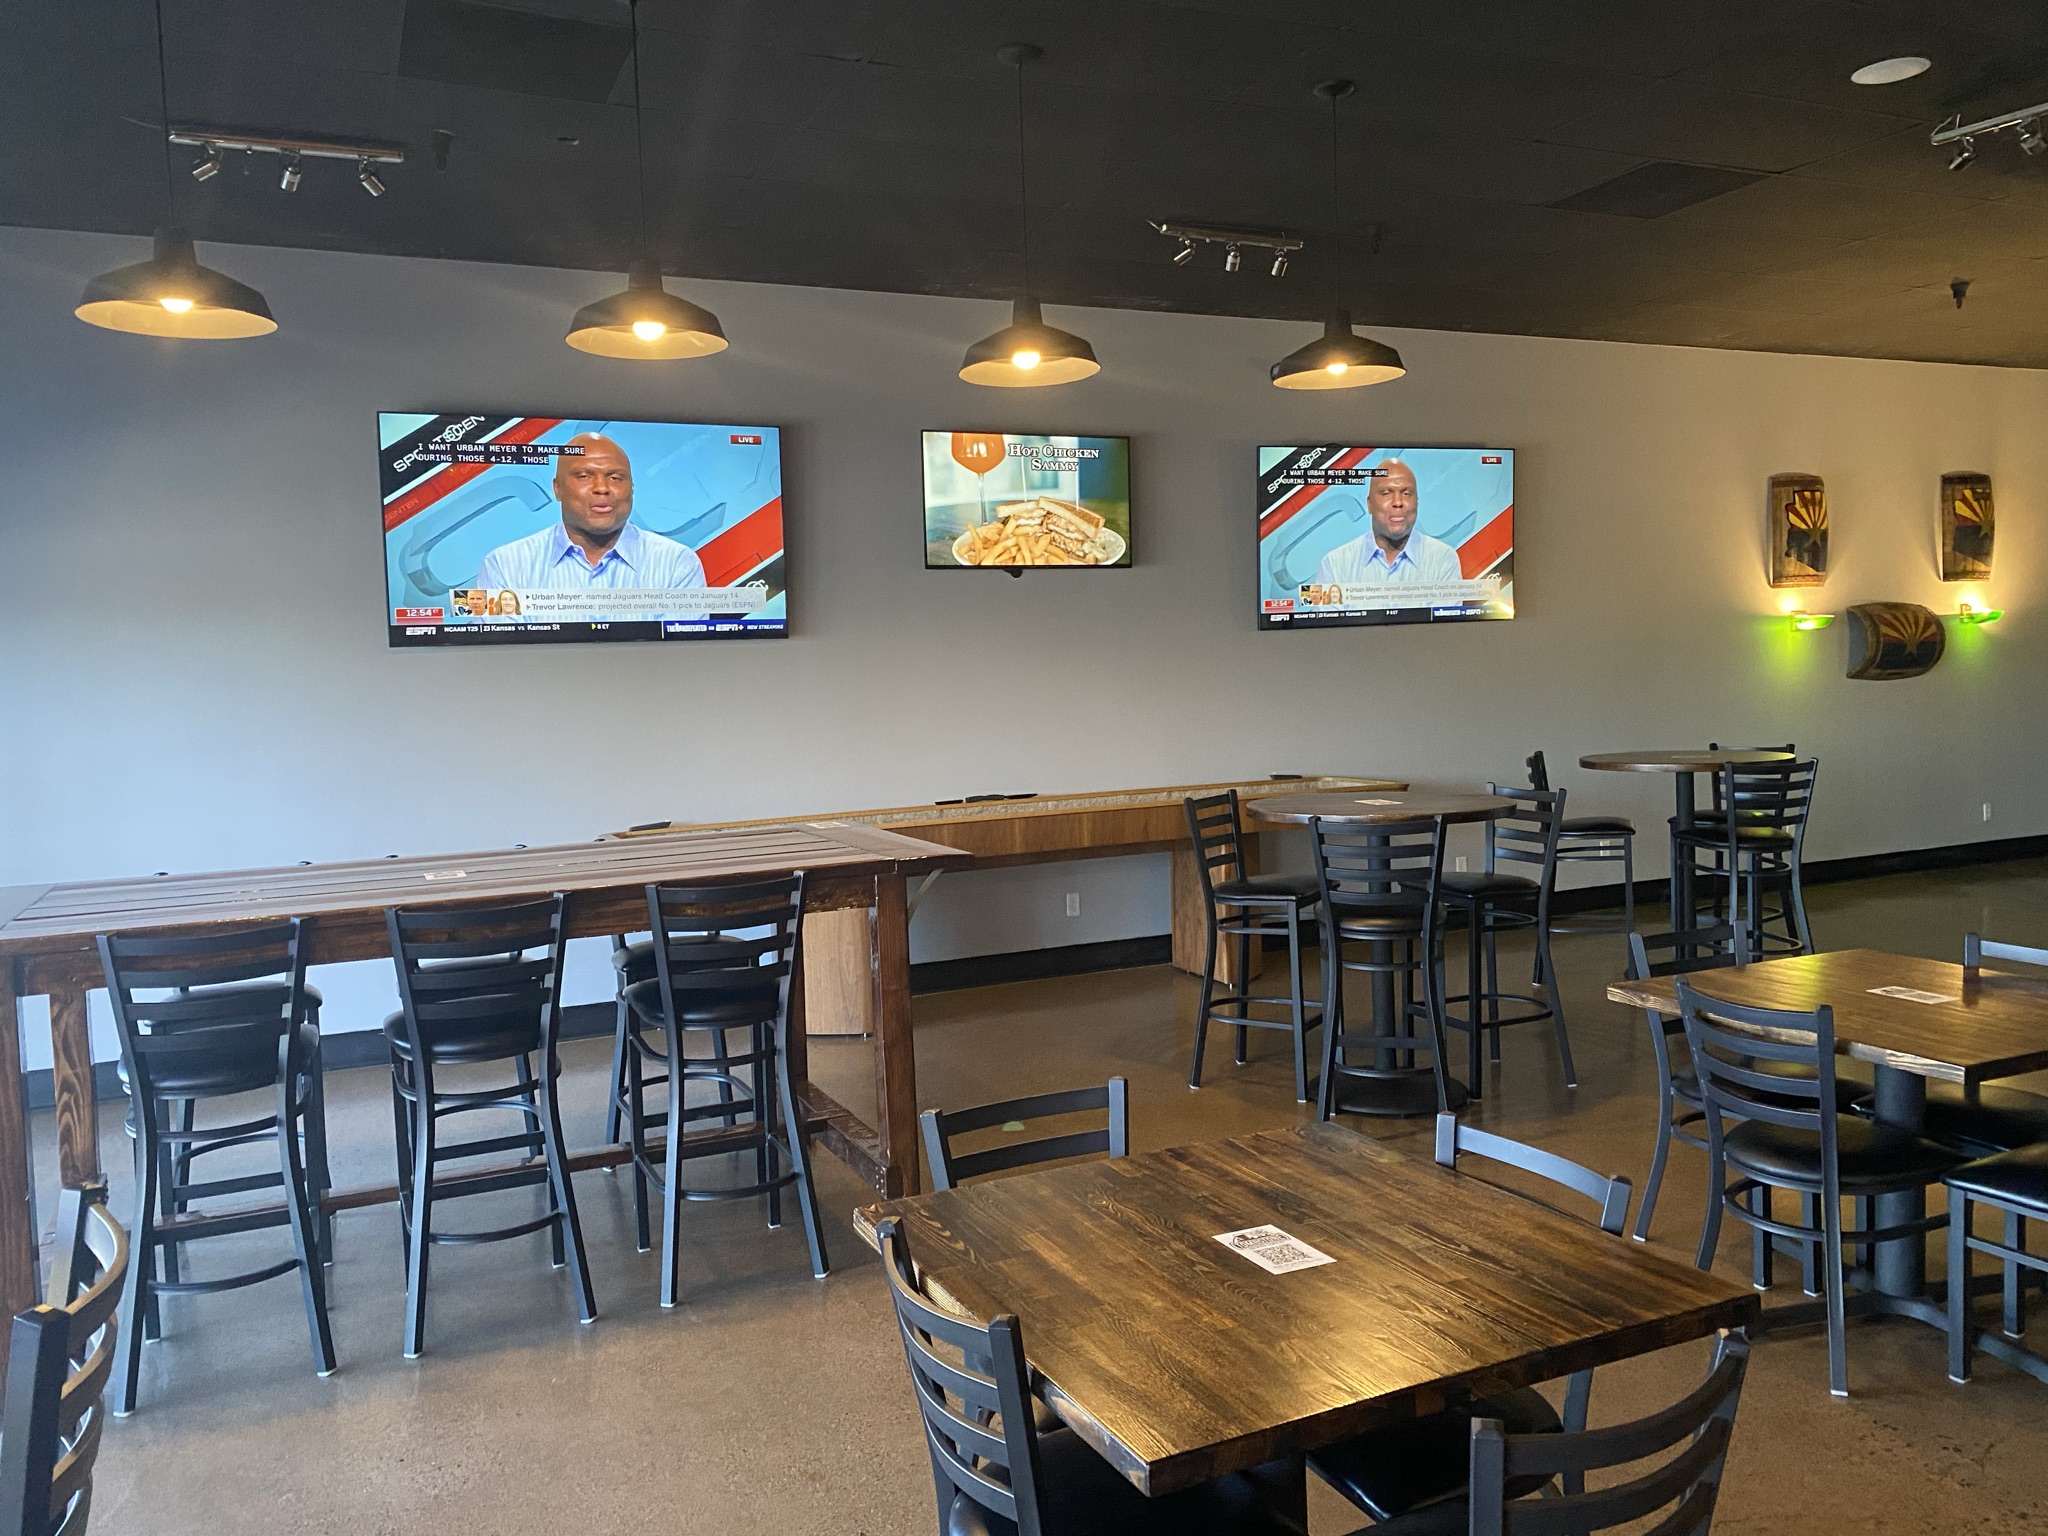 tombstone brewing interior with tvs on the wall, shuffle board, and tables